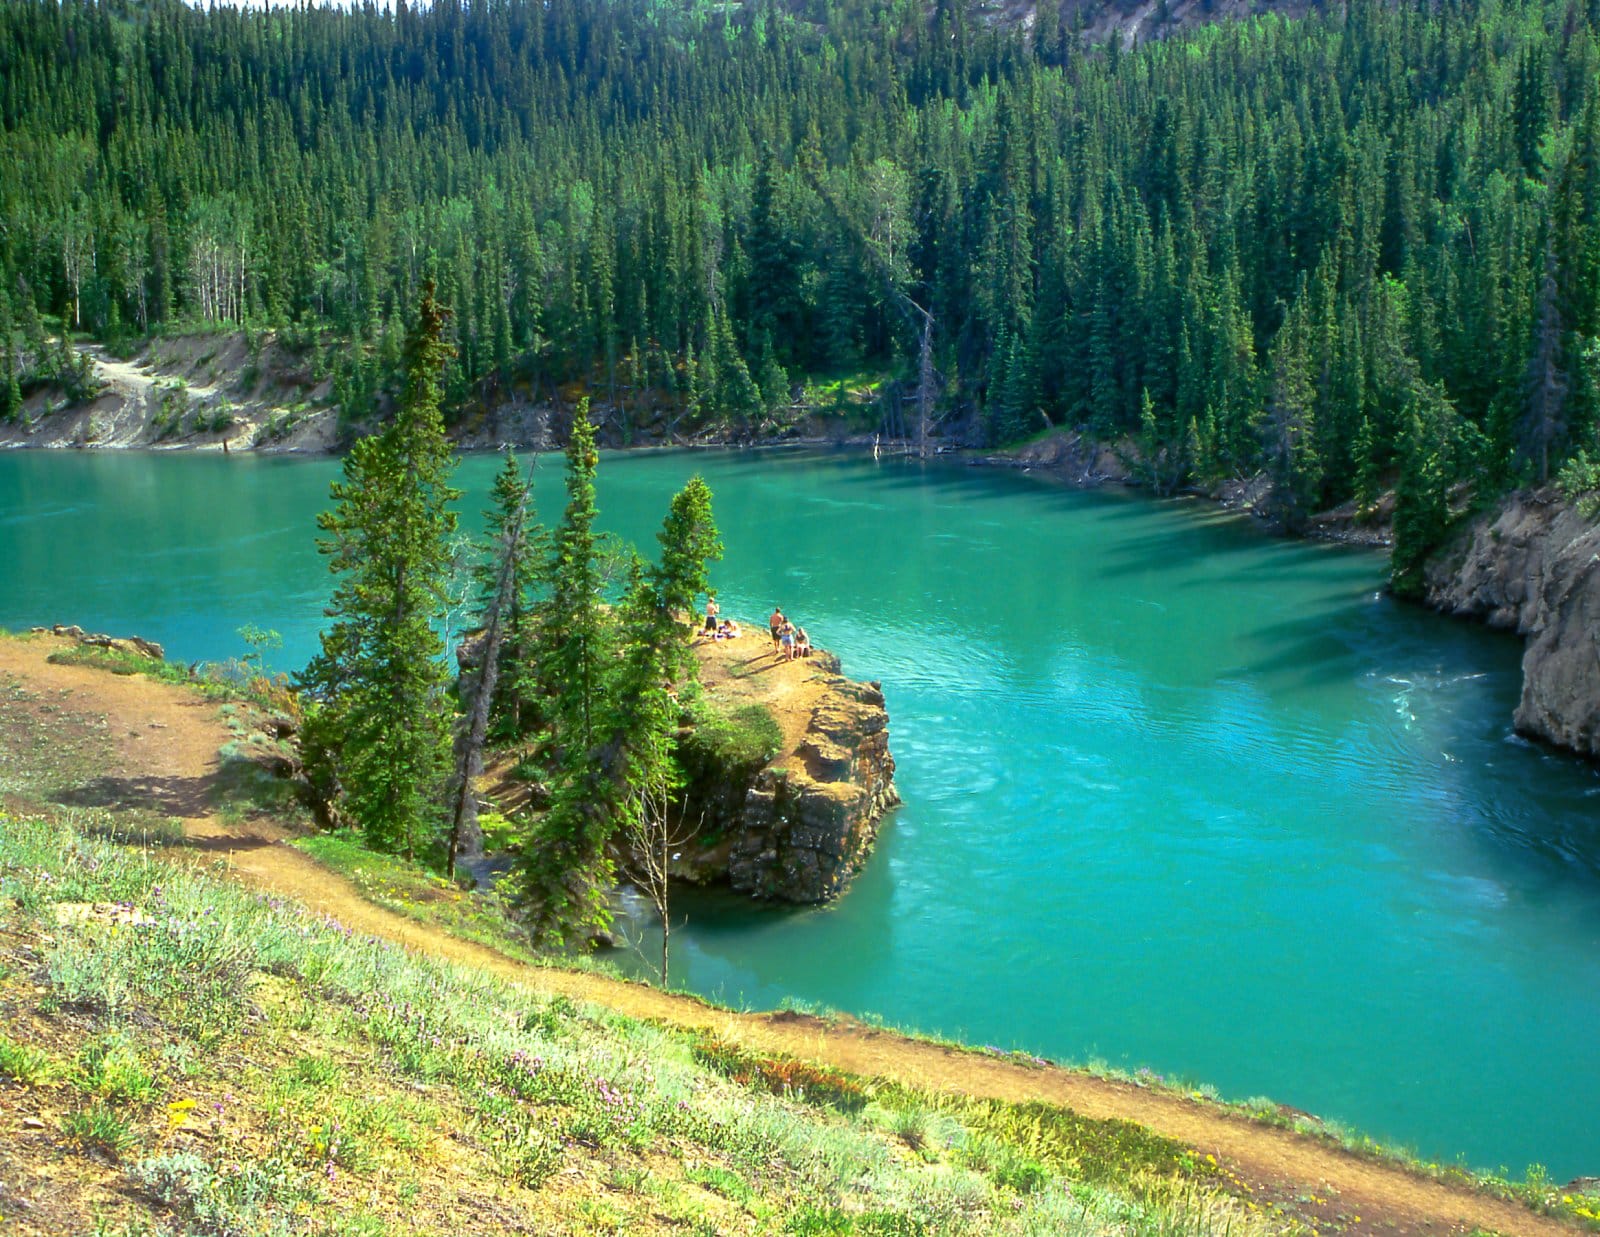 <p class="wp-caption-text">Image Credit: Shutterstock / Pecold</p>  <p><span>The Yukon River, flowing through the vast and wild landscapes of the Yukon Territory, offers an epic canoe camping journey steeped in the history of the Klondike Gold Rush. This mighty river, one of North America’s longest, serves as a lifeline through remote wilderness, providing paddlers with a true sense of adventure and isolation. The journey on the Yukon River can vary from relatively easy sections suitable for beginners to more challenging stretches that demand experience and skill. Along the way, canoeists encounter historic sites, abandoned settlements, and an abundance of wildlife, including bears, moose, and eagles, set against the backdrop of breathtaking northern scenery. The river’s clear waters and the surrounding untouched wilderness make it an ideal destination for those seeking to combine history with outdoor adventure.</span></p>